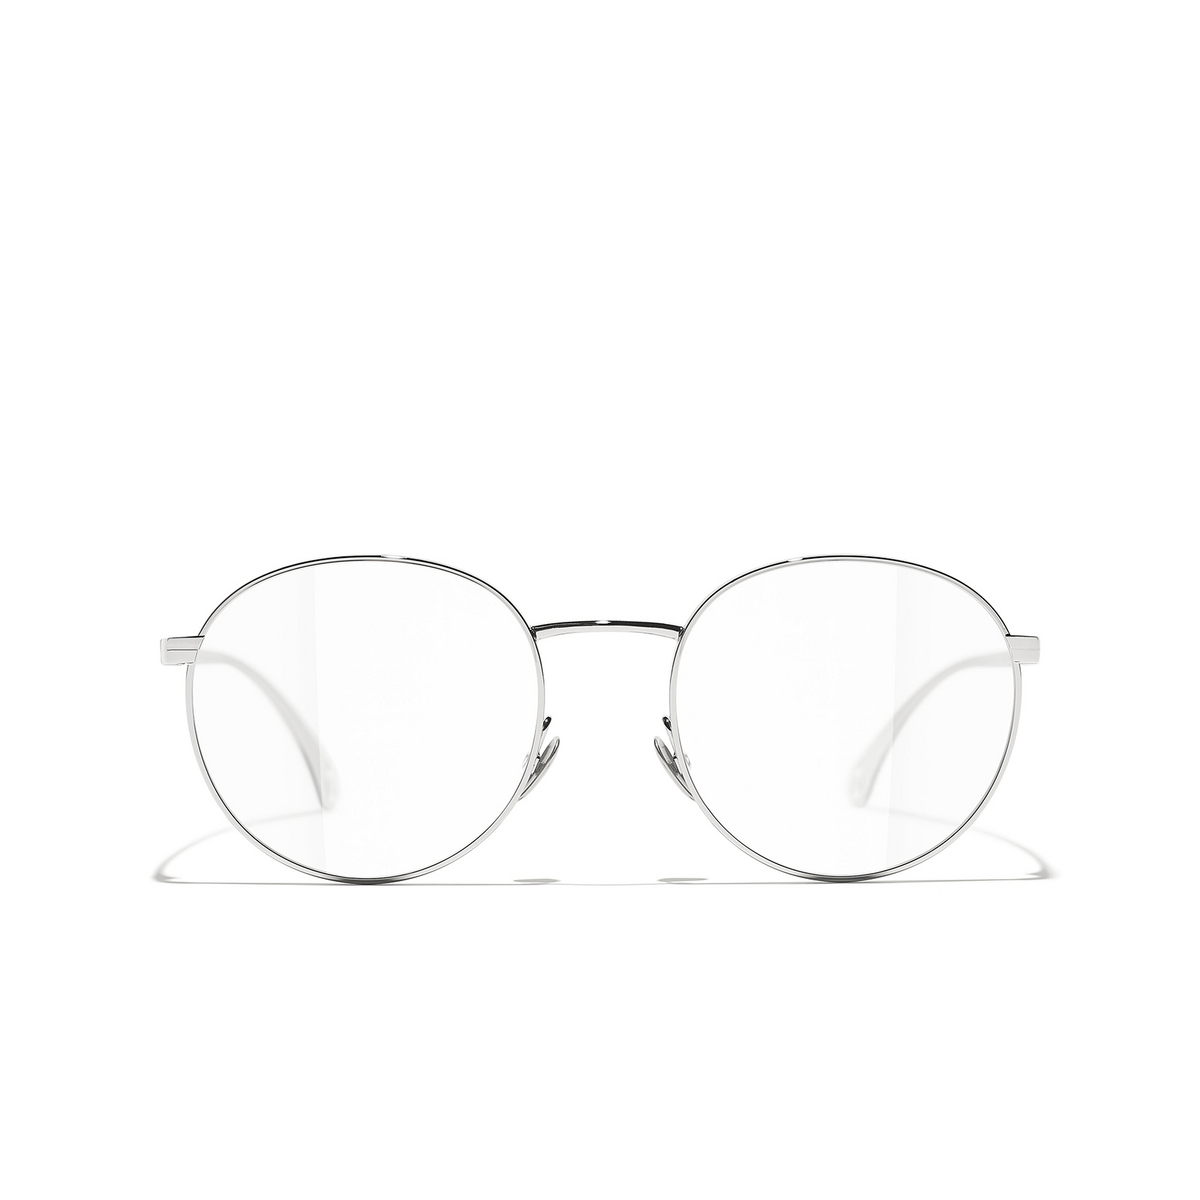 CHANEL oval Eyeglasses C124 Silver - front view